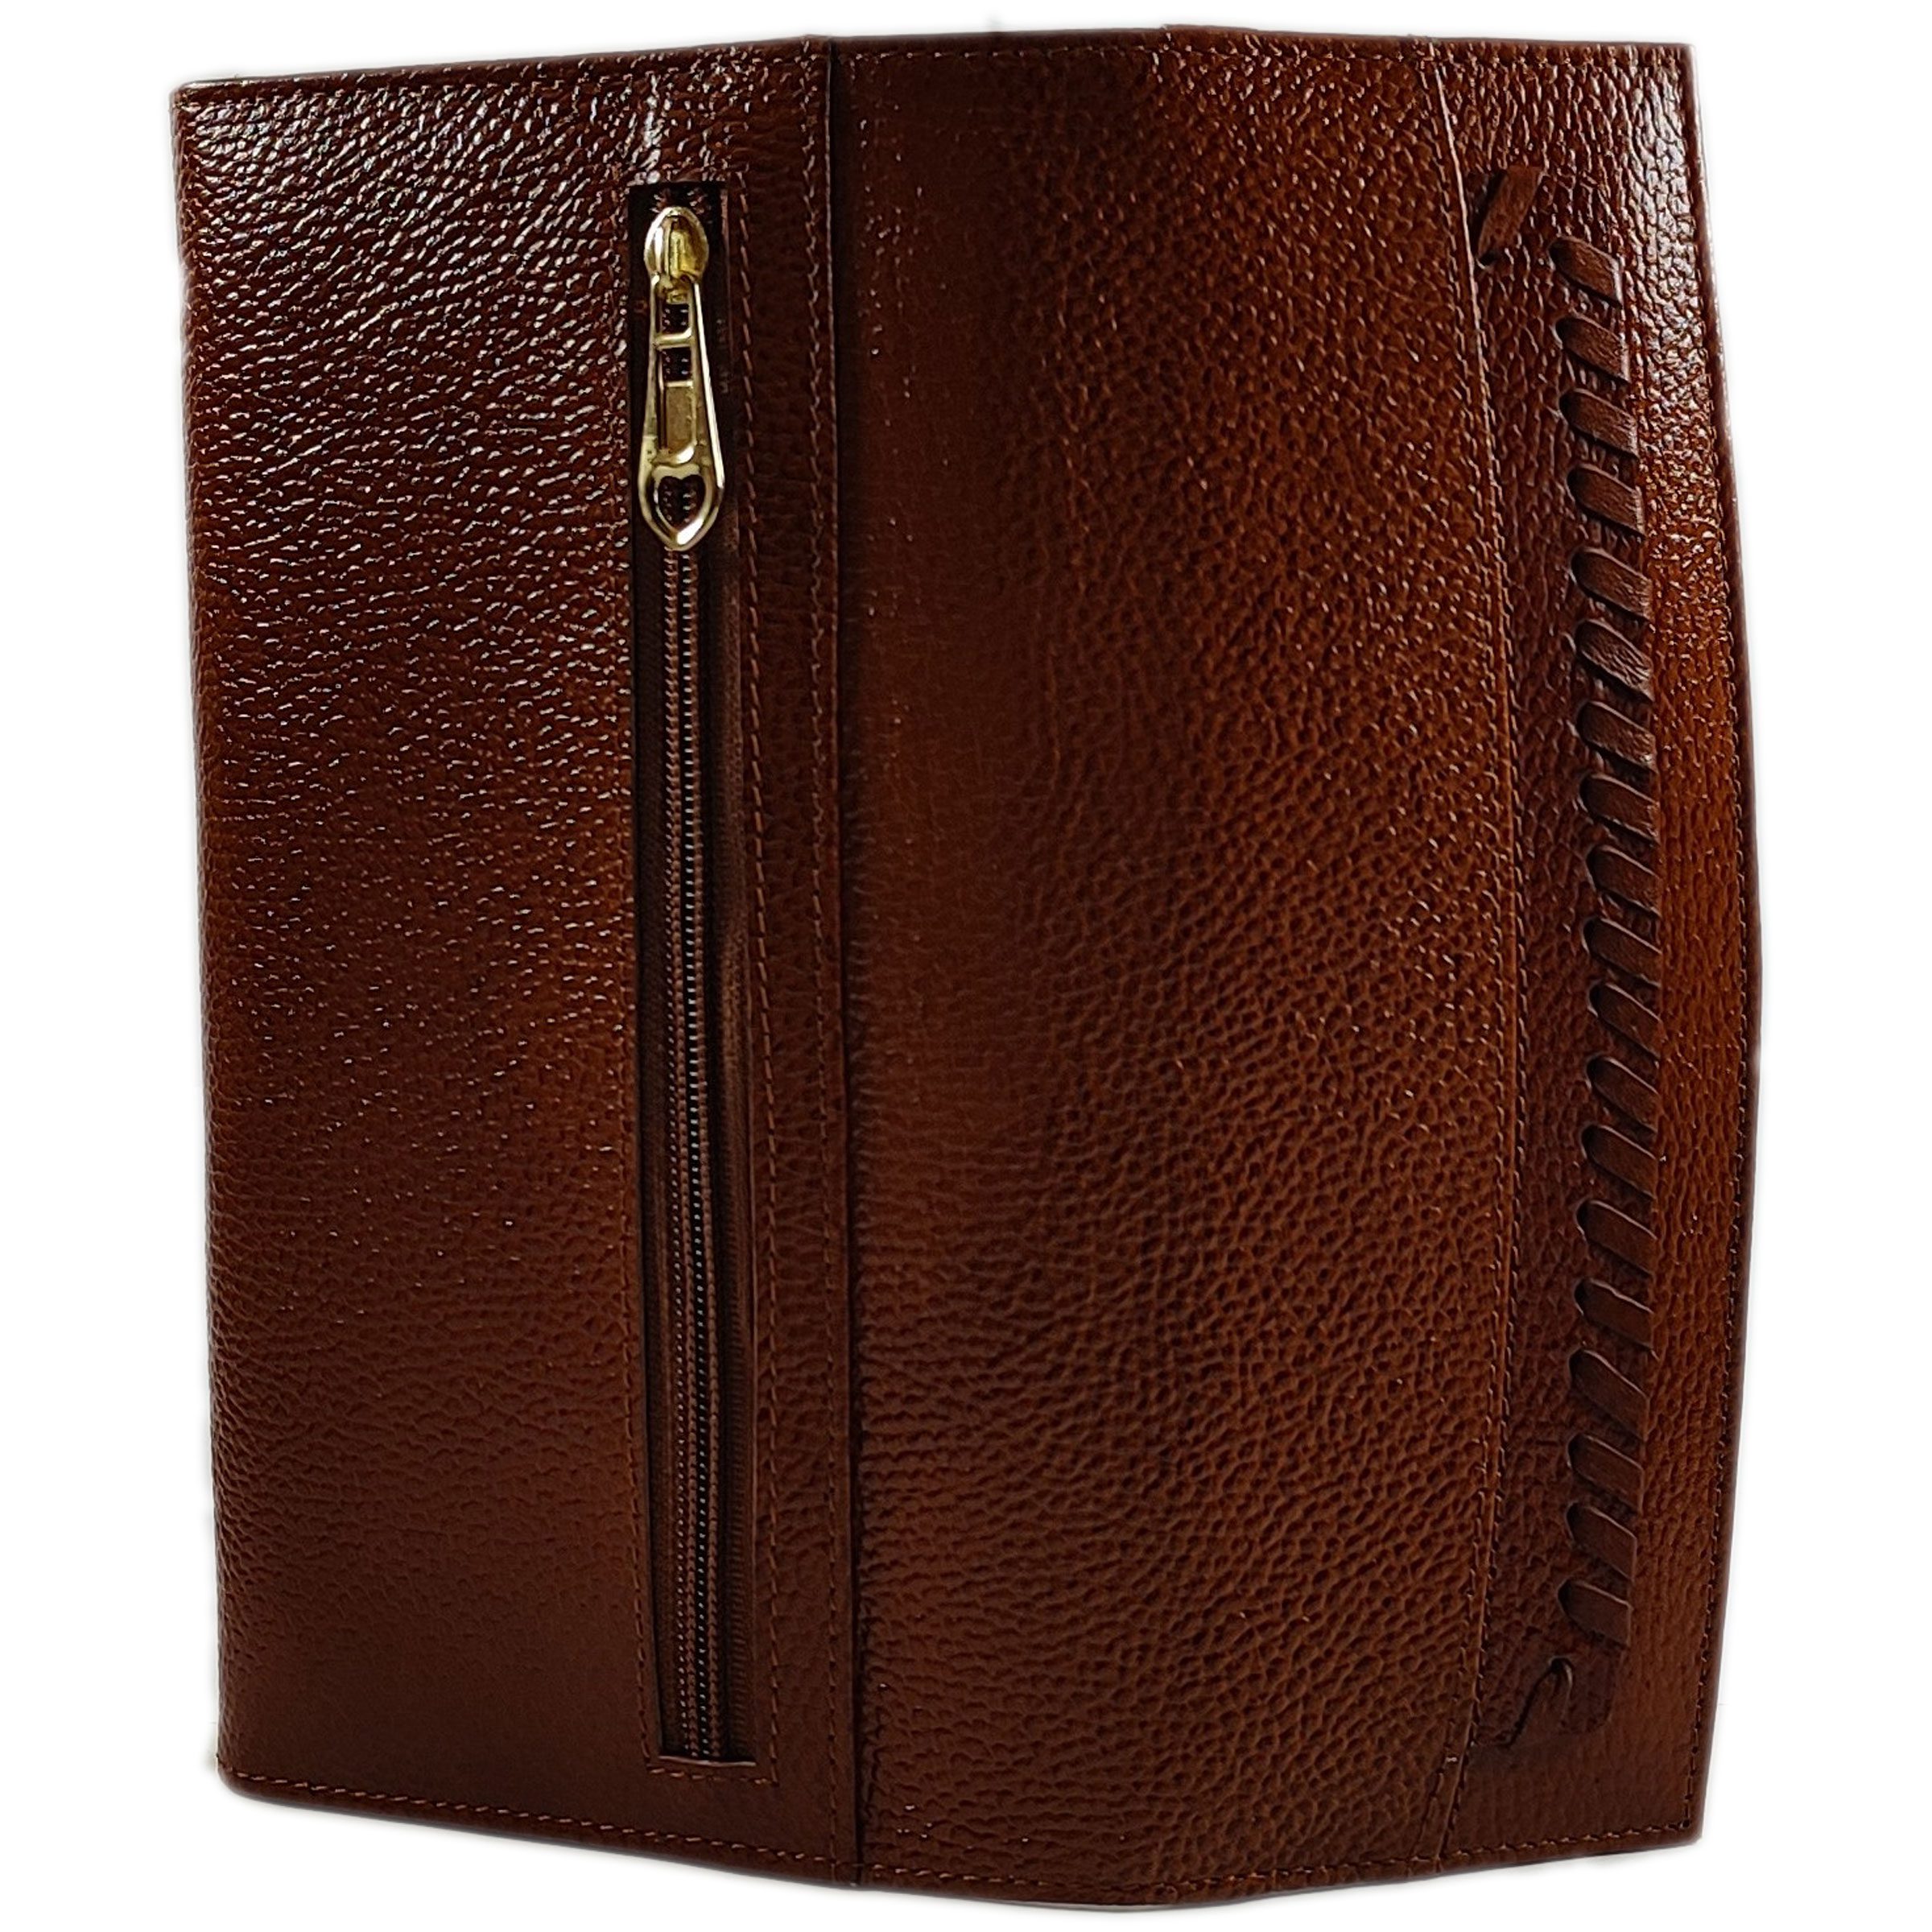 Buy Lino Perros Golden Leather Clutch For Women At Best Price @ Tata CLiQ-cheohanoi.vn